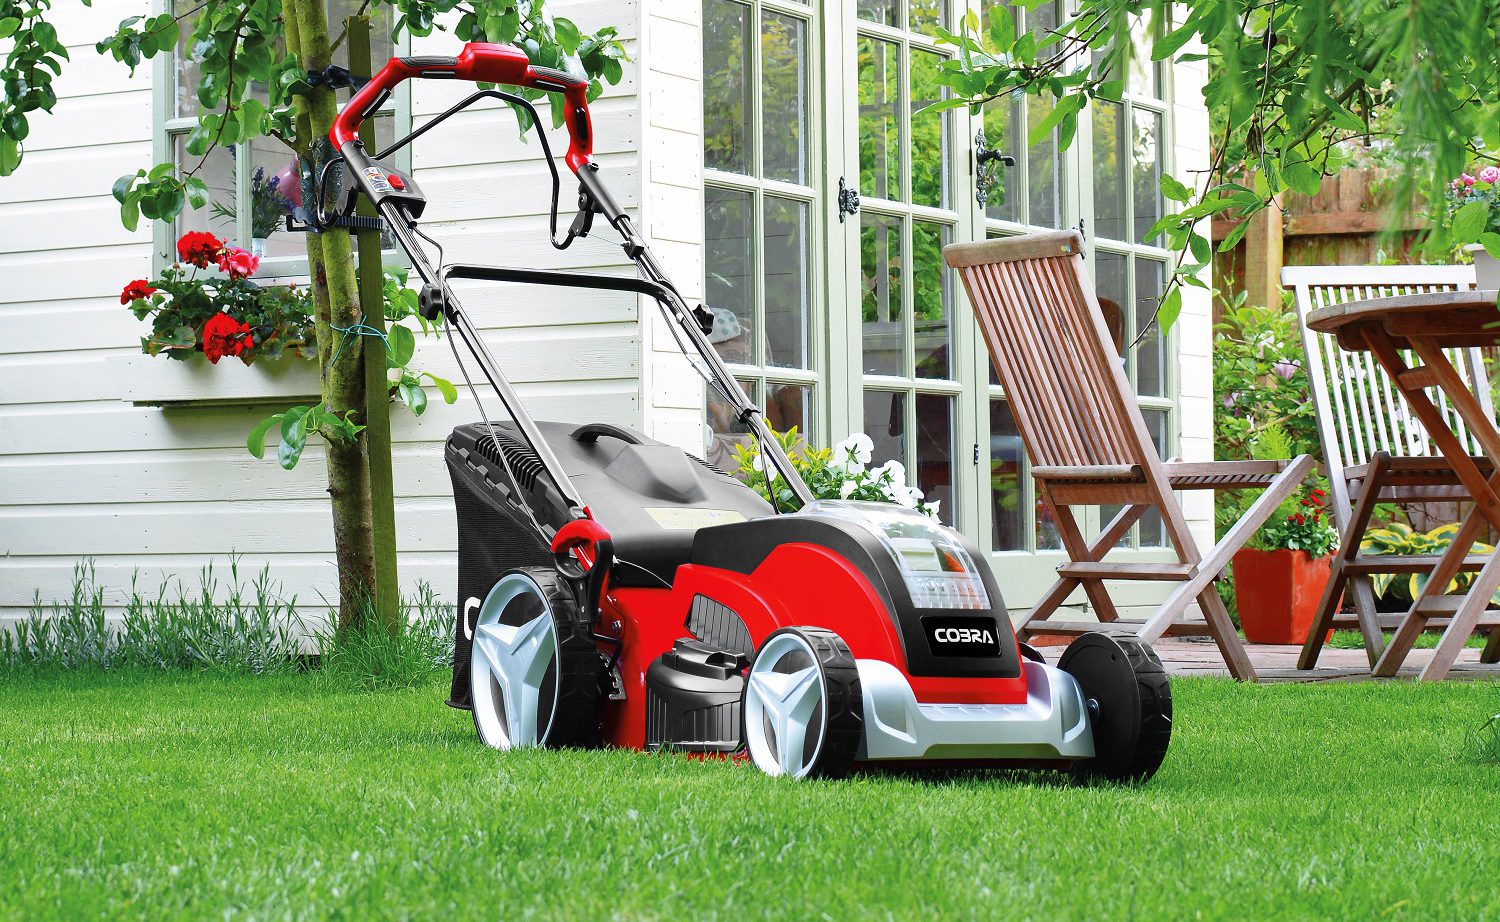 A red and black garden mower on a grassy lawn with summer seating in the background